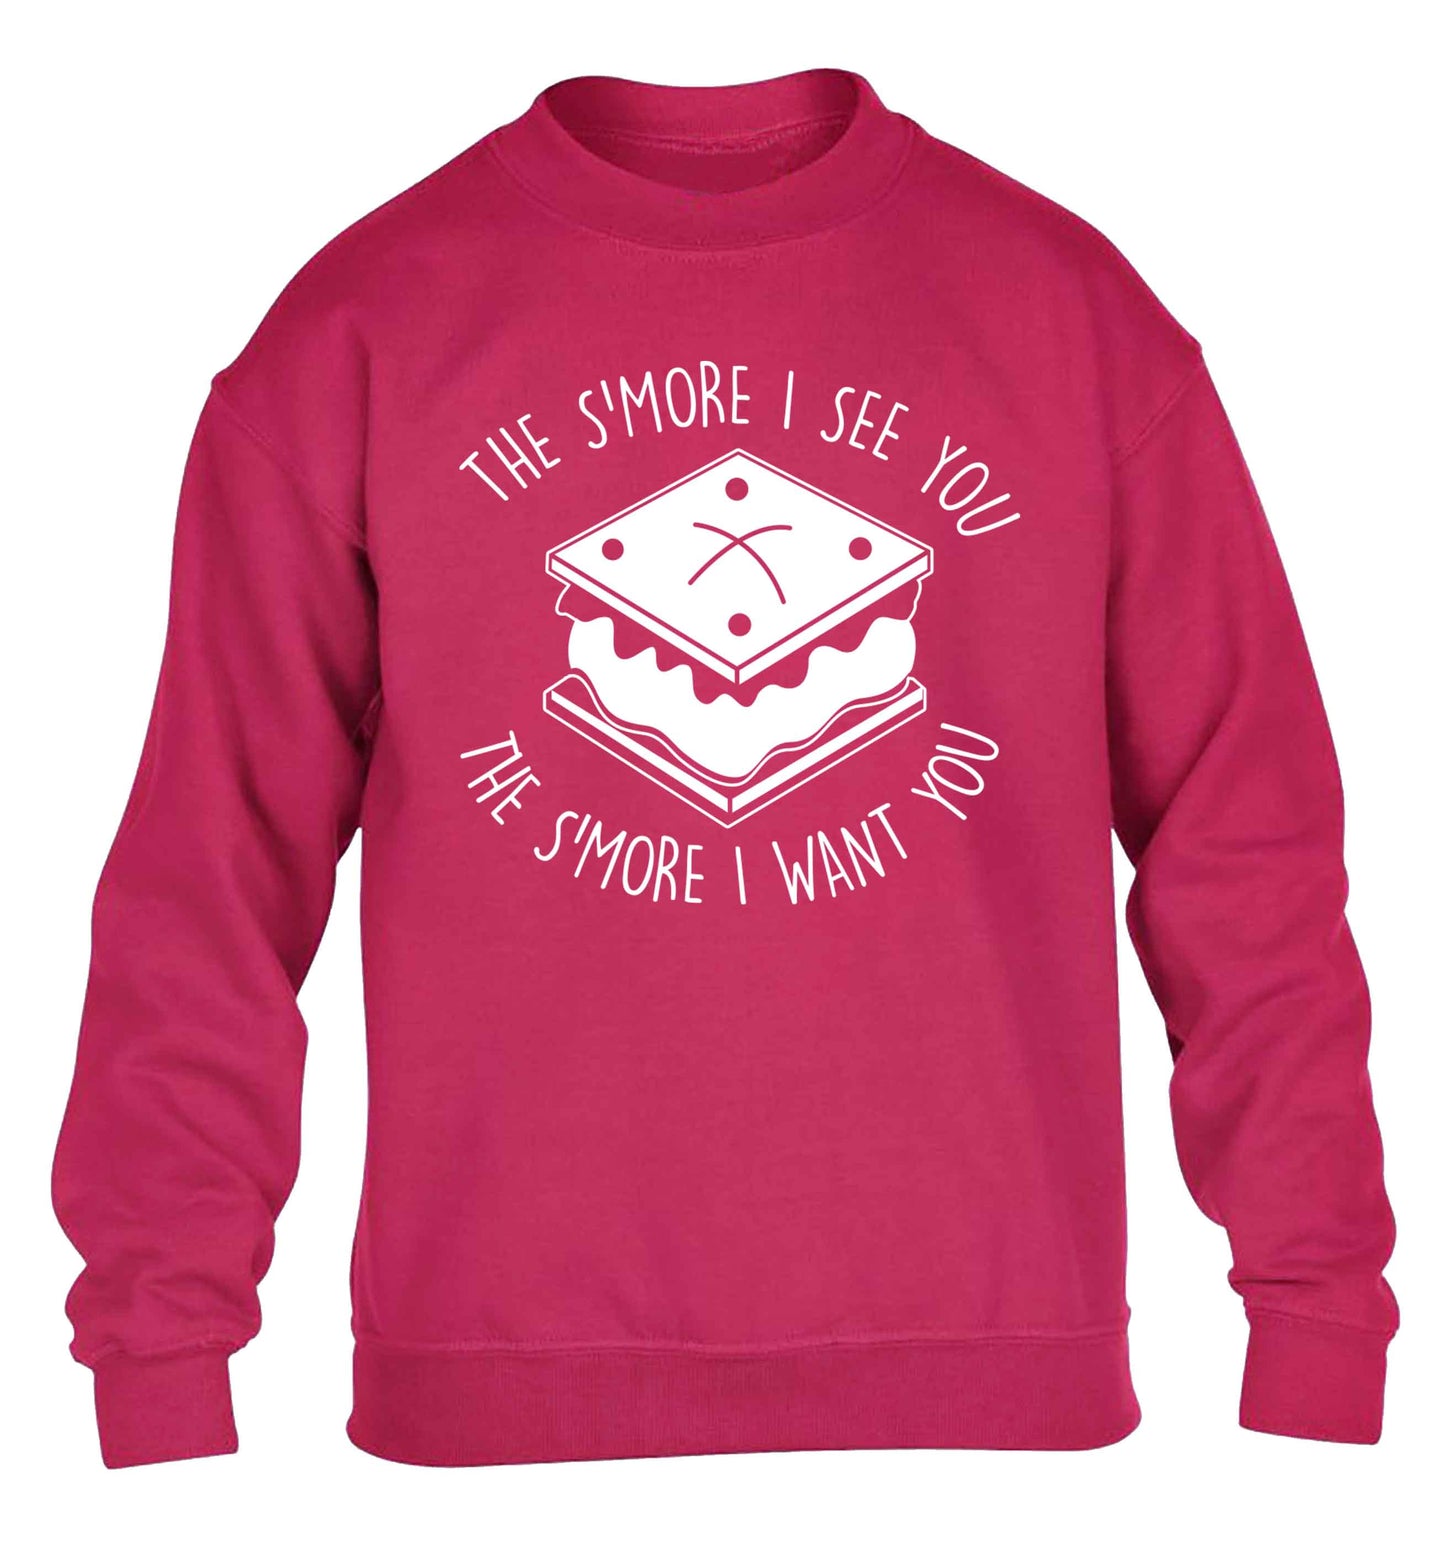 The s'more I see you the s'more I want you children's pink sweater 12-13 Years